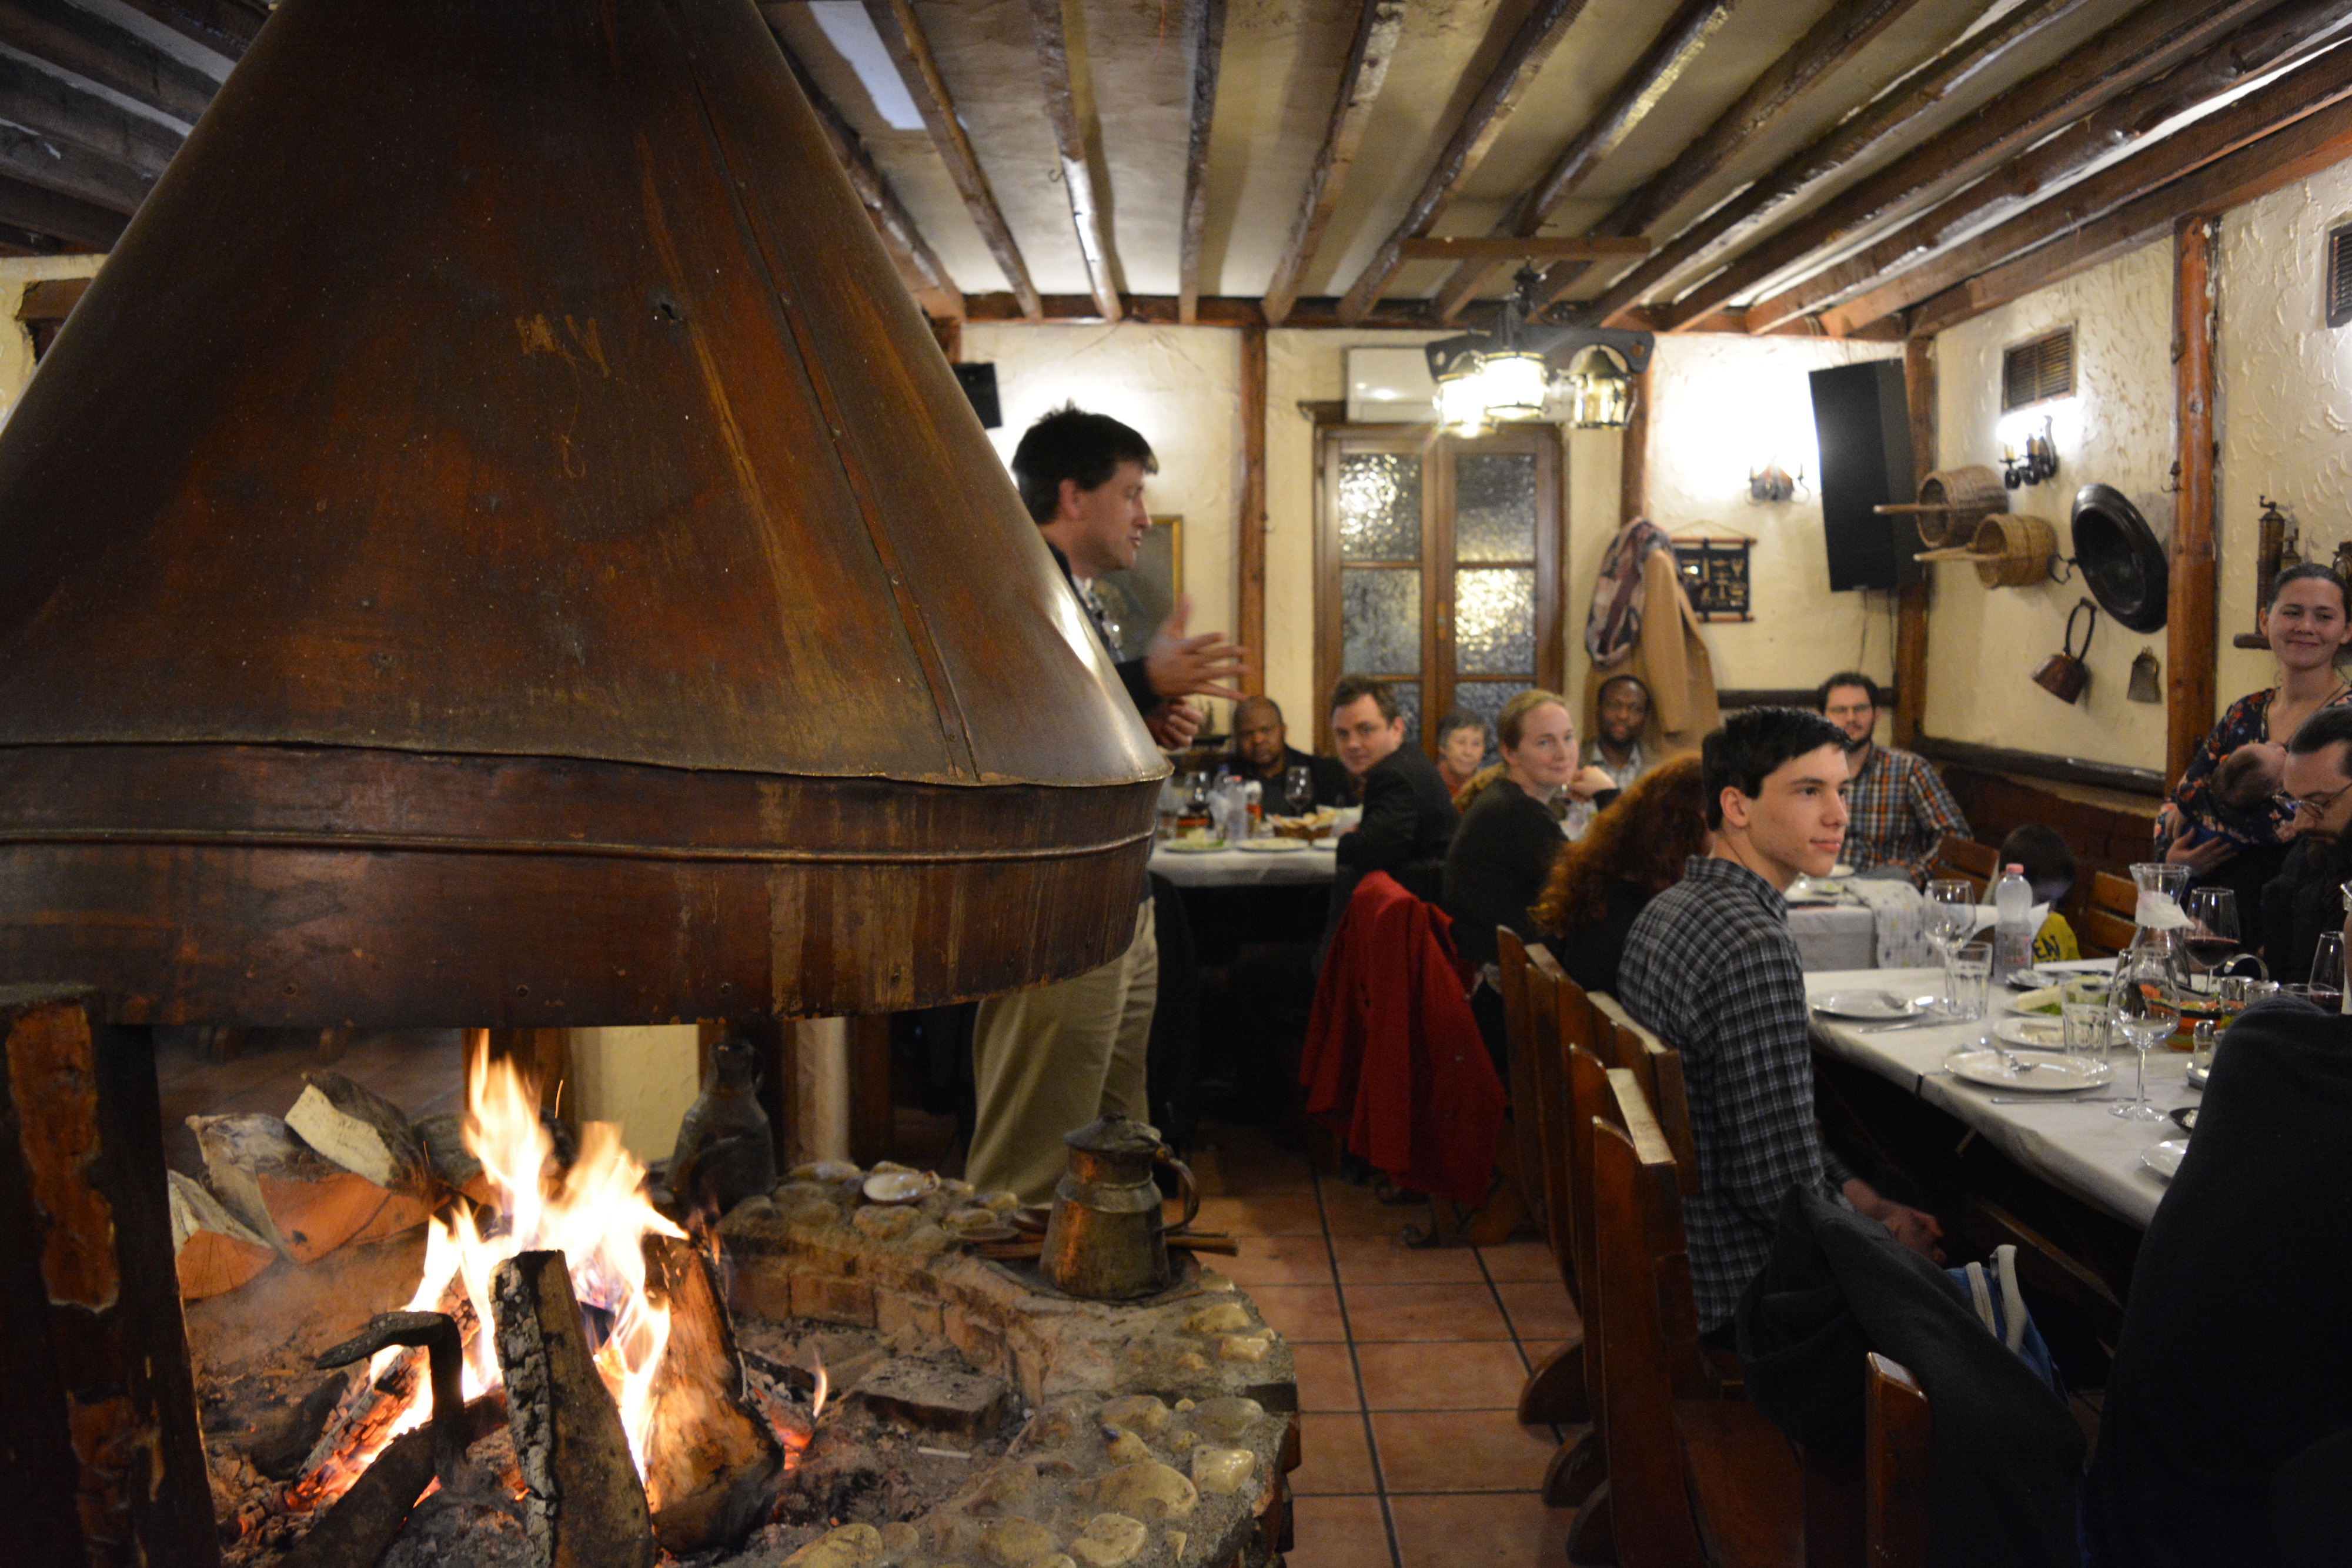 Meeting with American orthodox missionaries - in a typical Albanian restaurant around an open fireplace